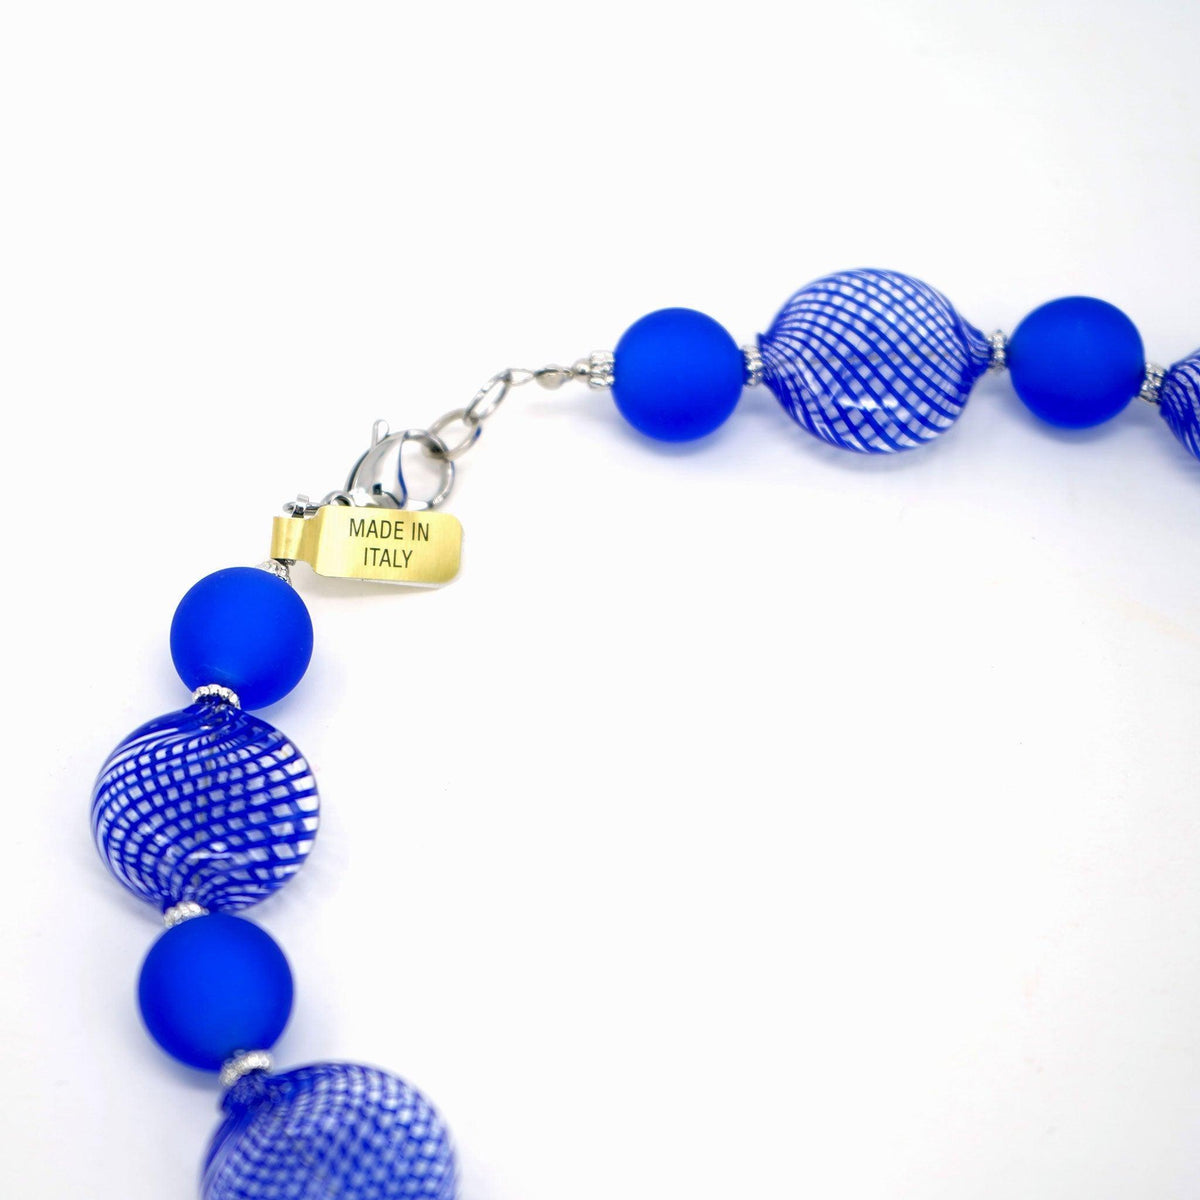 Authentic Murano Glass Beaded Necklace, Monica9, Round and Disc Shaped Beads - MyItalianDecor